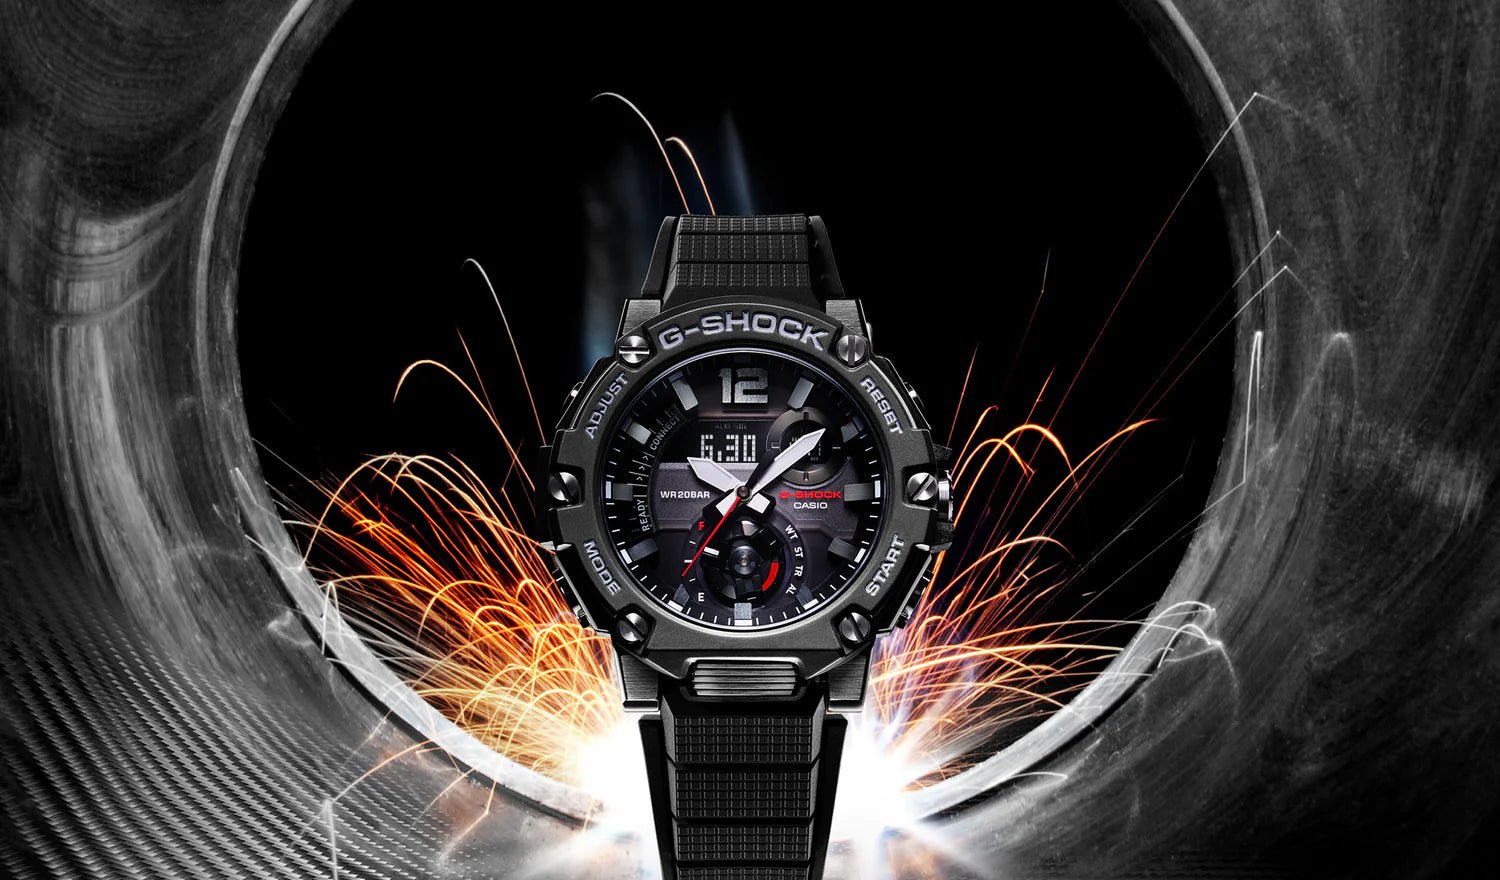 Ever wanted to blow up a G-Shock and see what would happen? - CASIO Australia